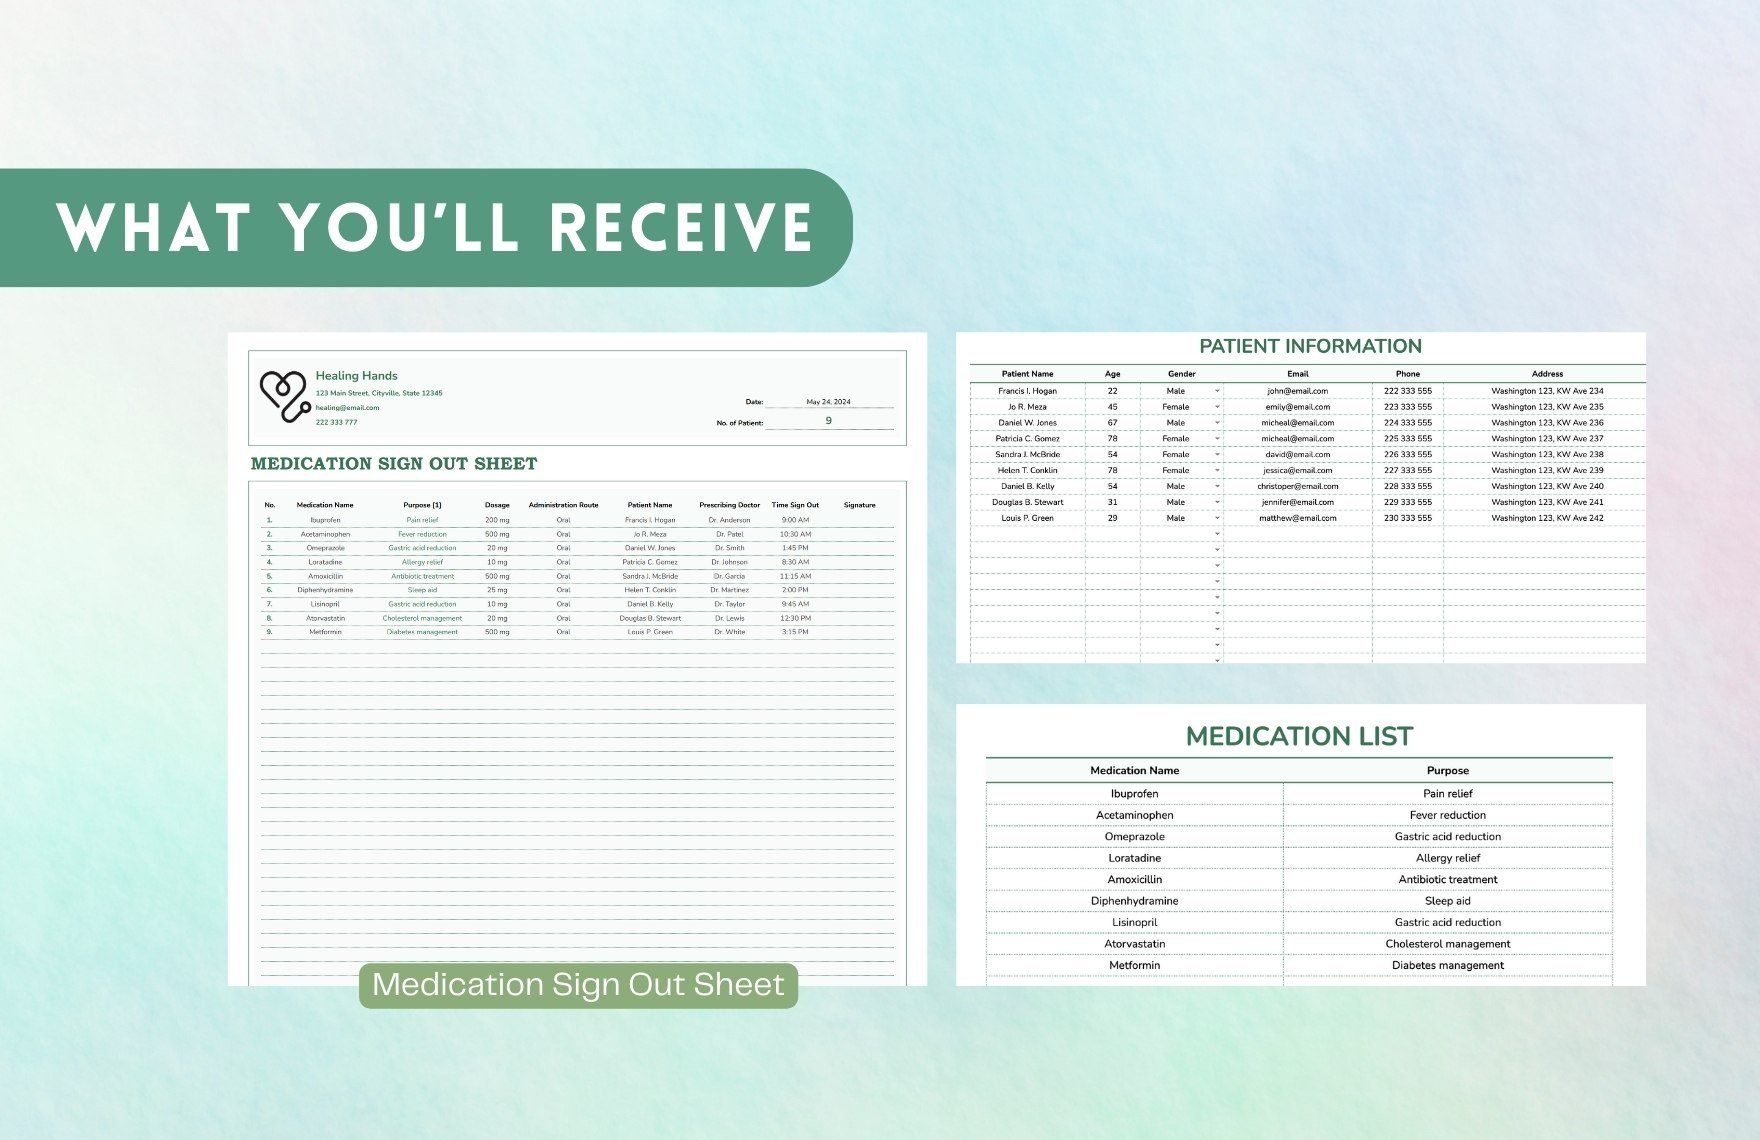 Medication Sign Out Sheet Template